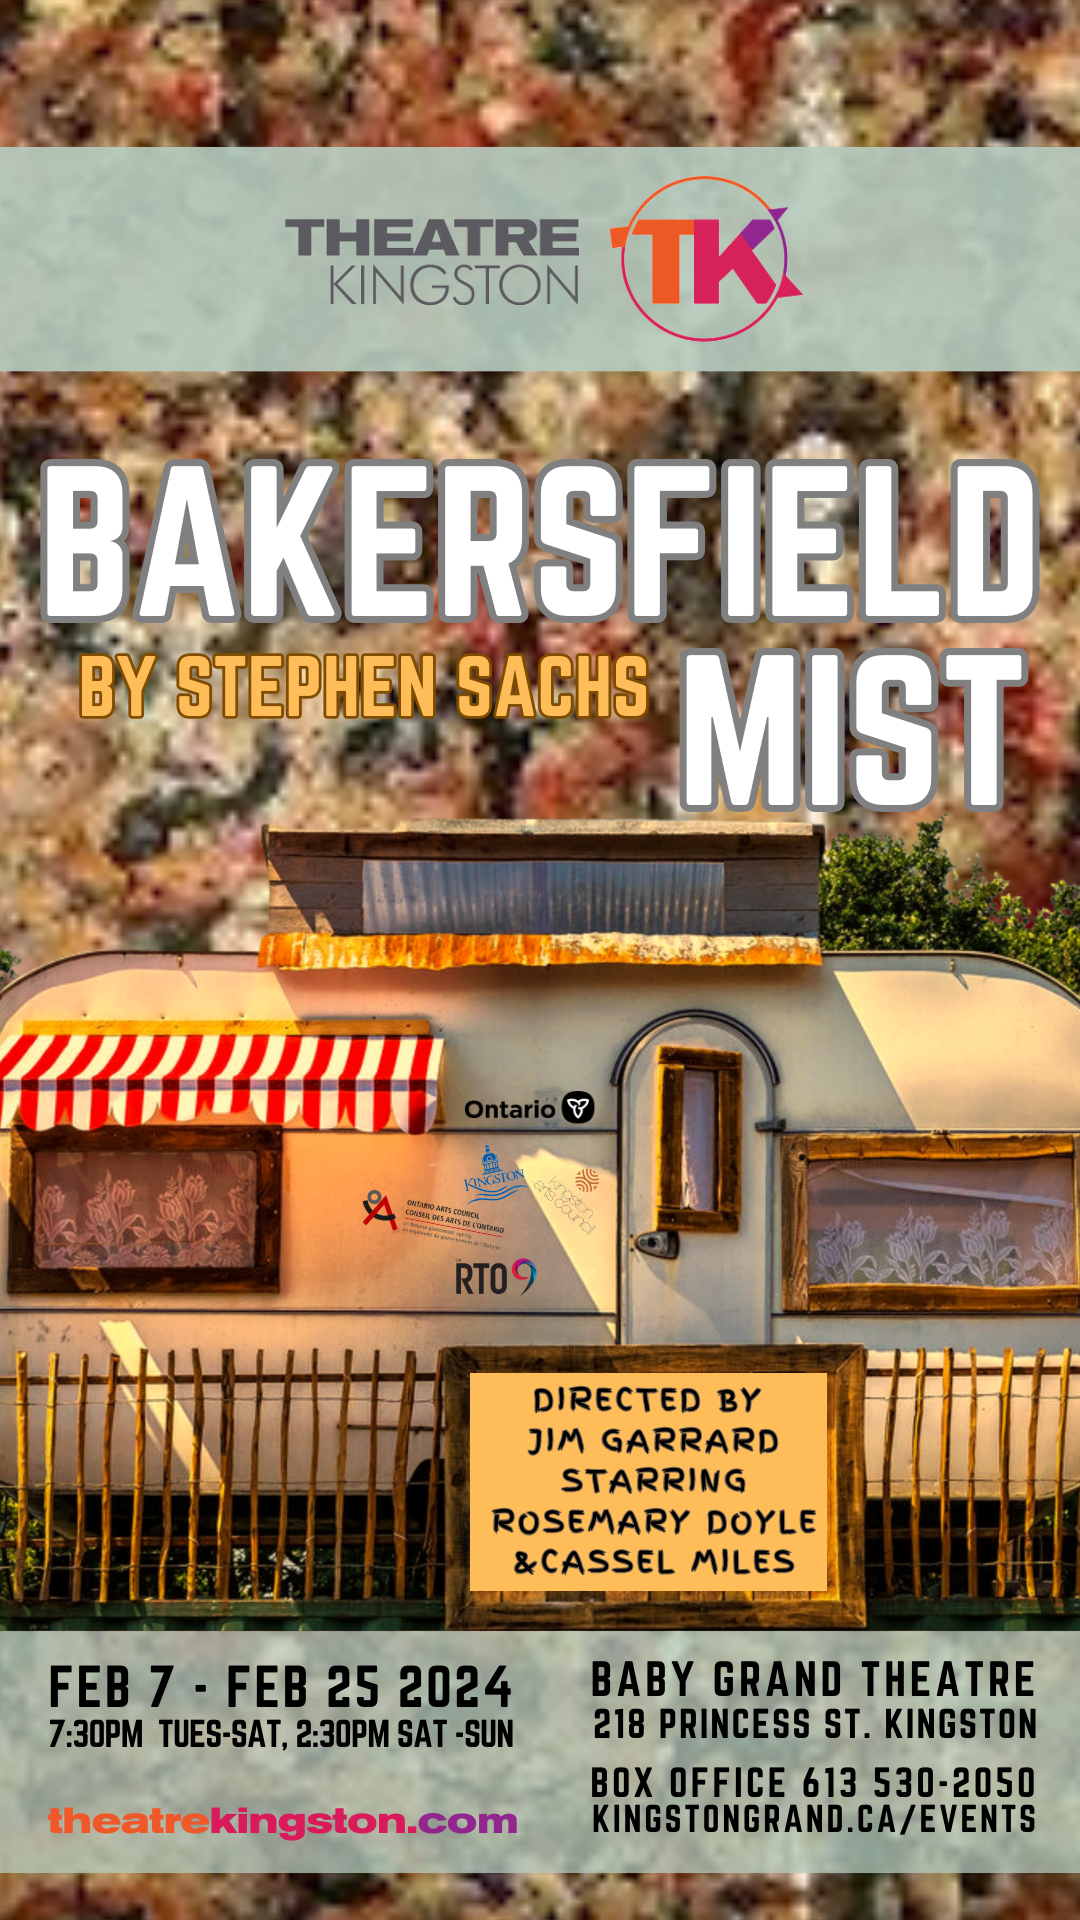 Poster for Theatre Kingston's production of 'Bakersfield Mist'. An RV appears behind a fence. The title, director, cast, company, playwright, dates, times, and location of the show are on the poster.